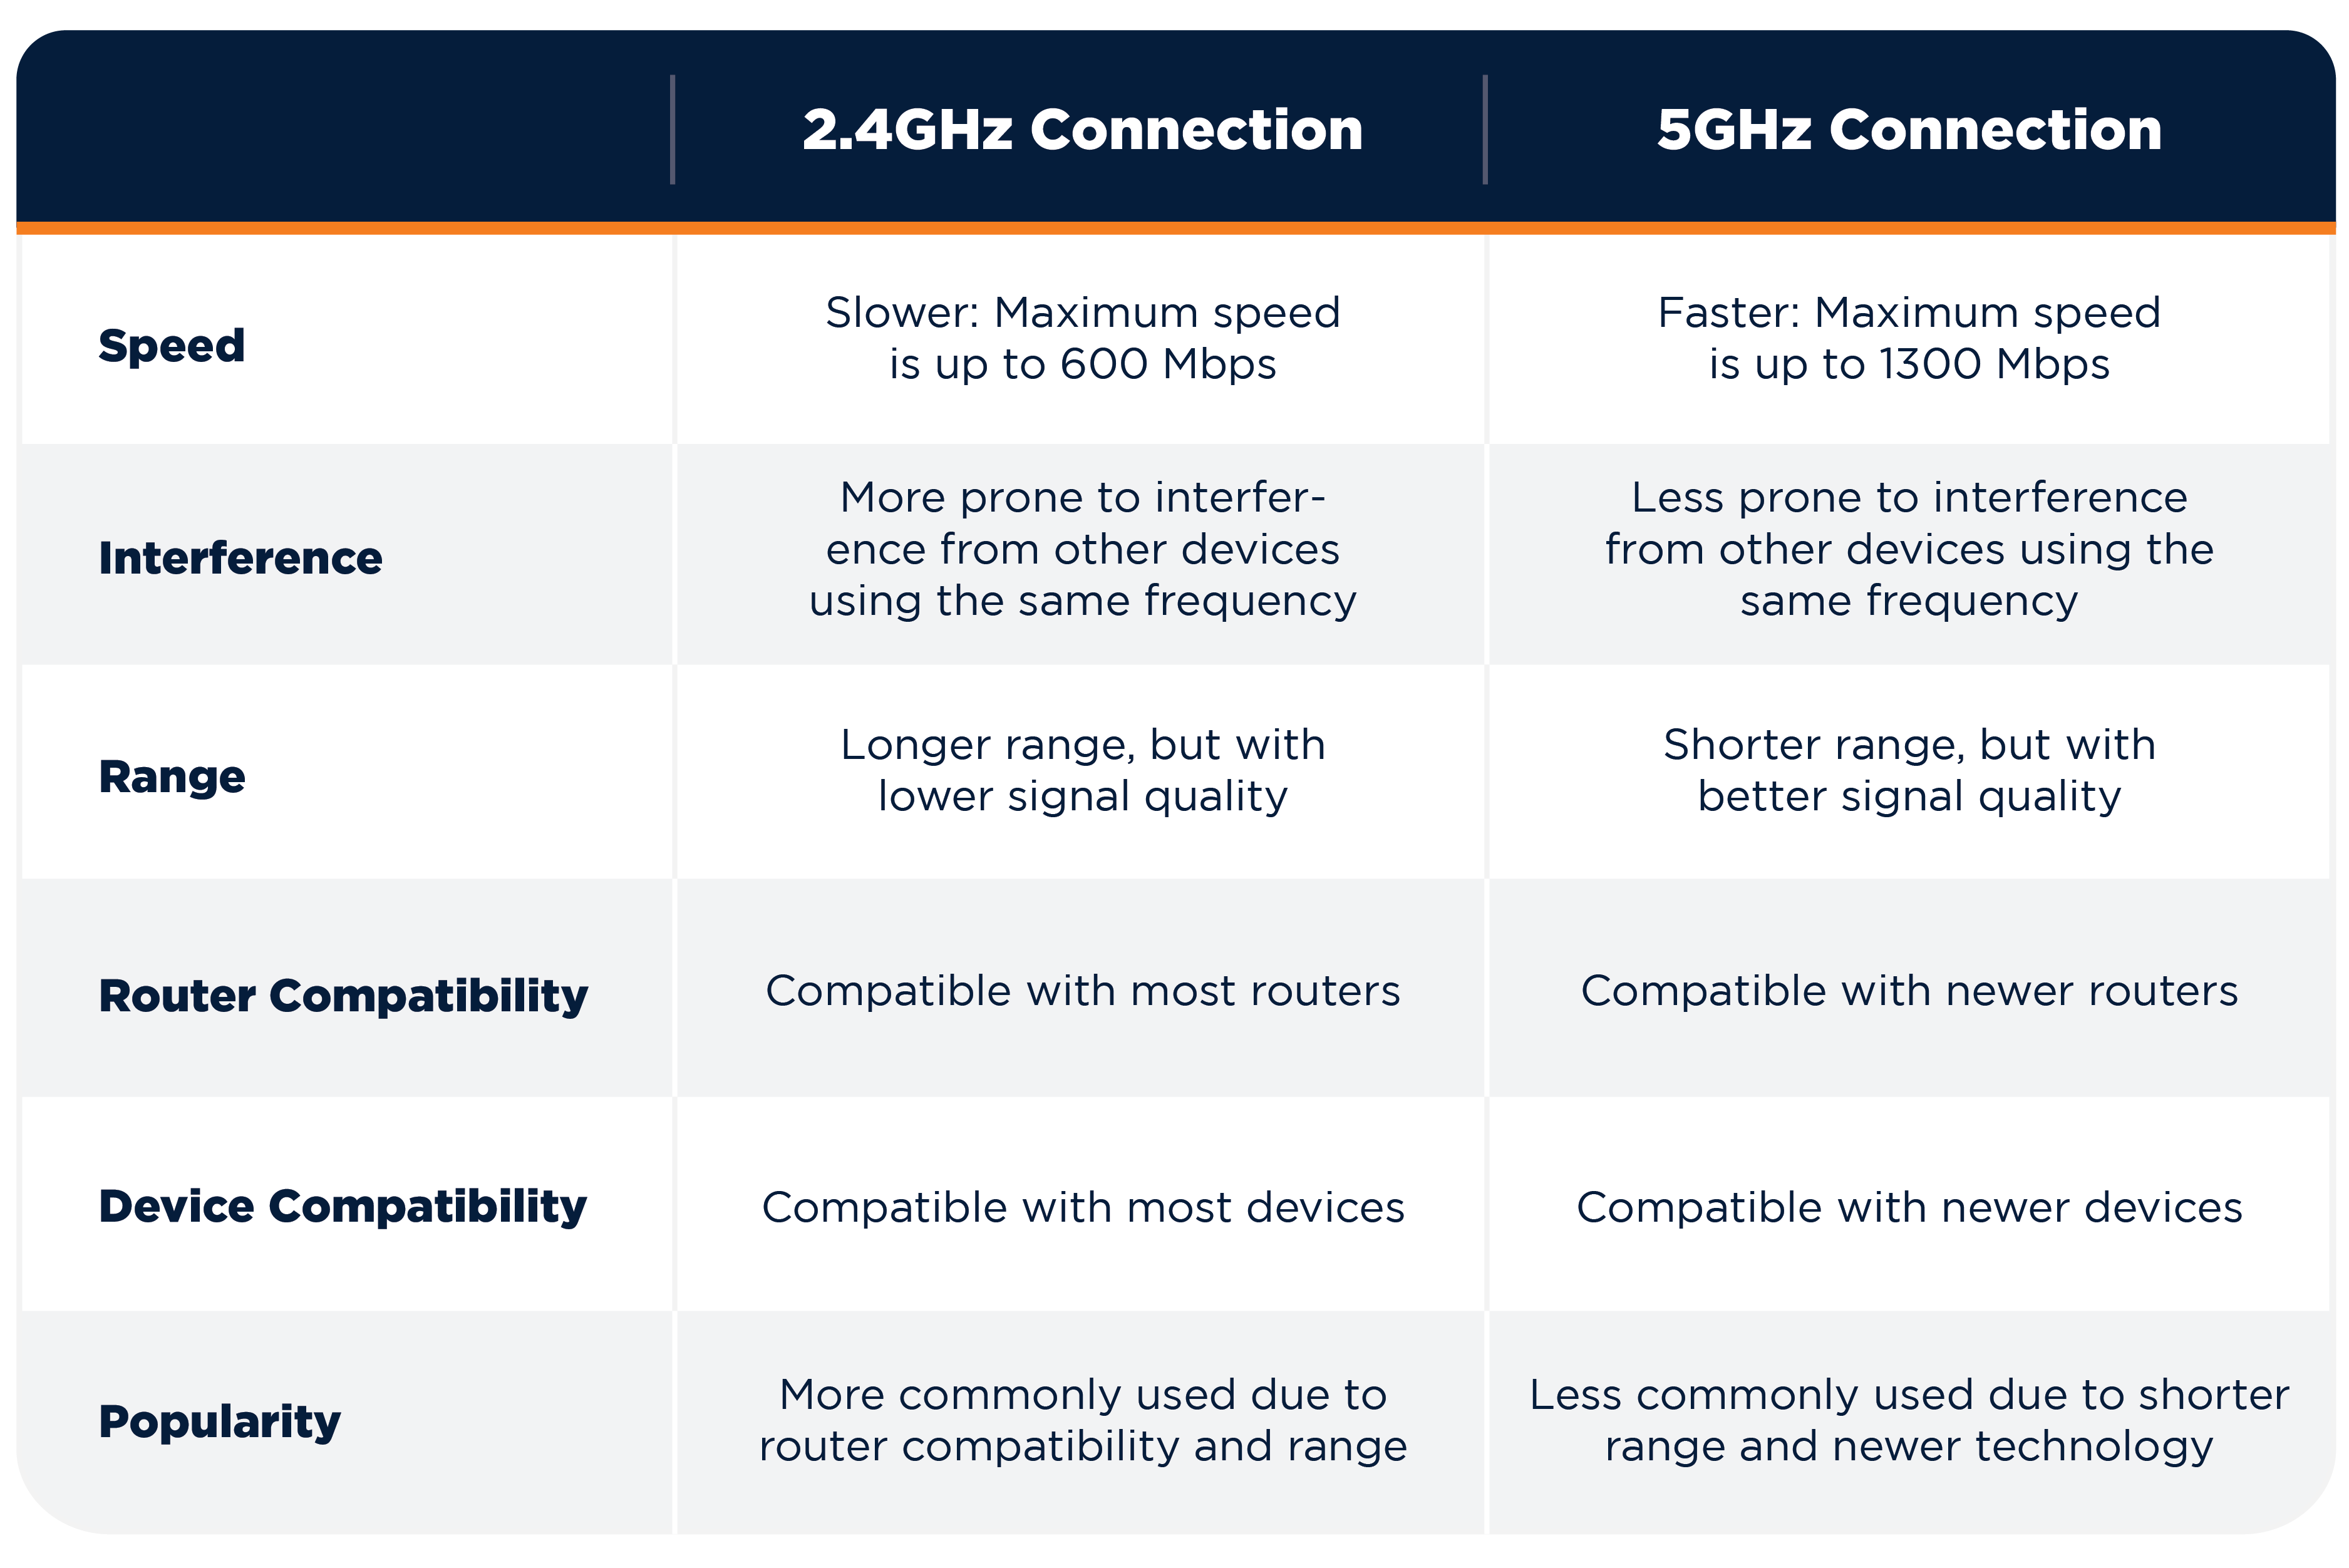 The Differences Between 2.4GHz vs 5GHz Connection table<br />
